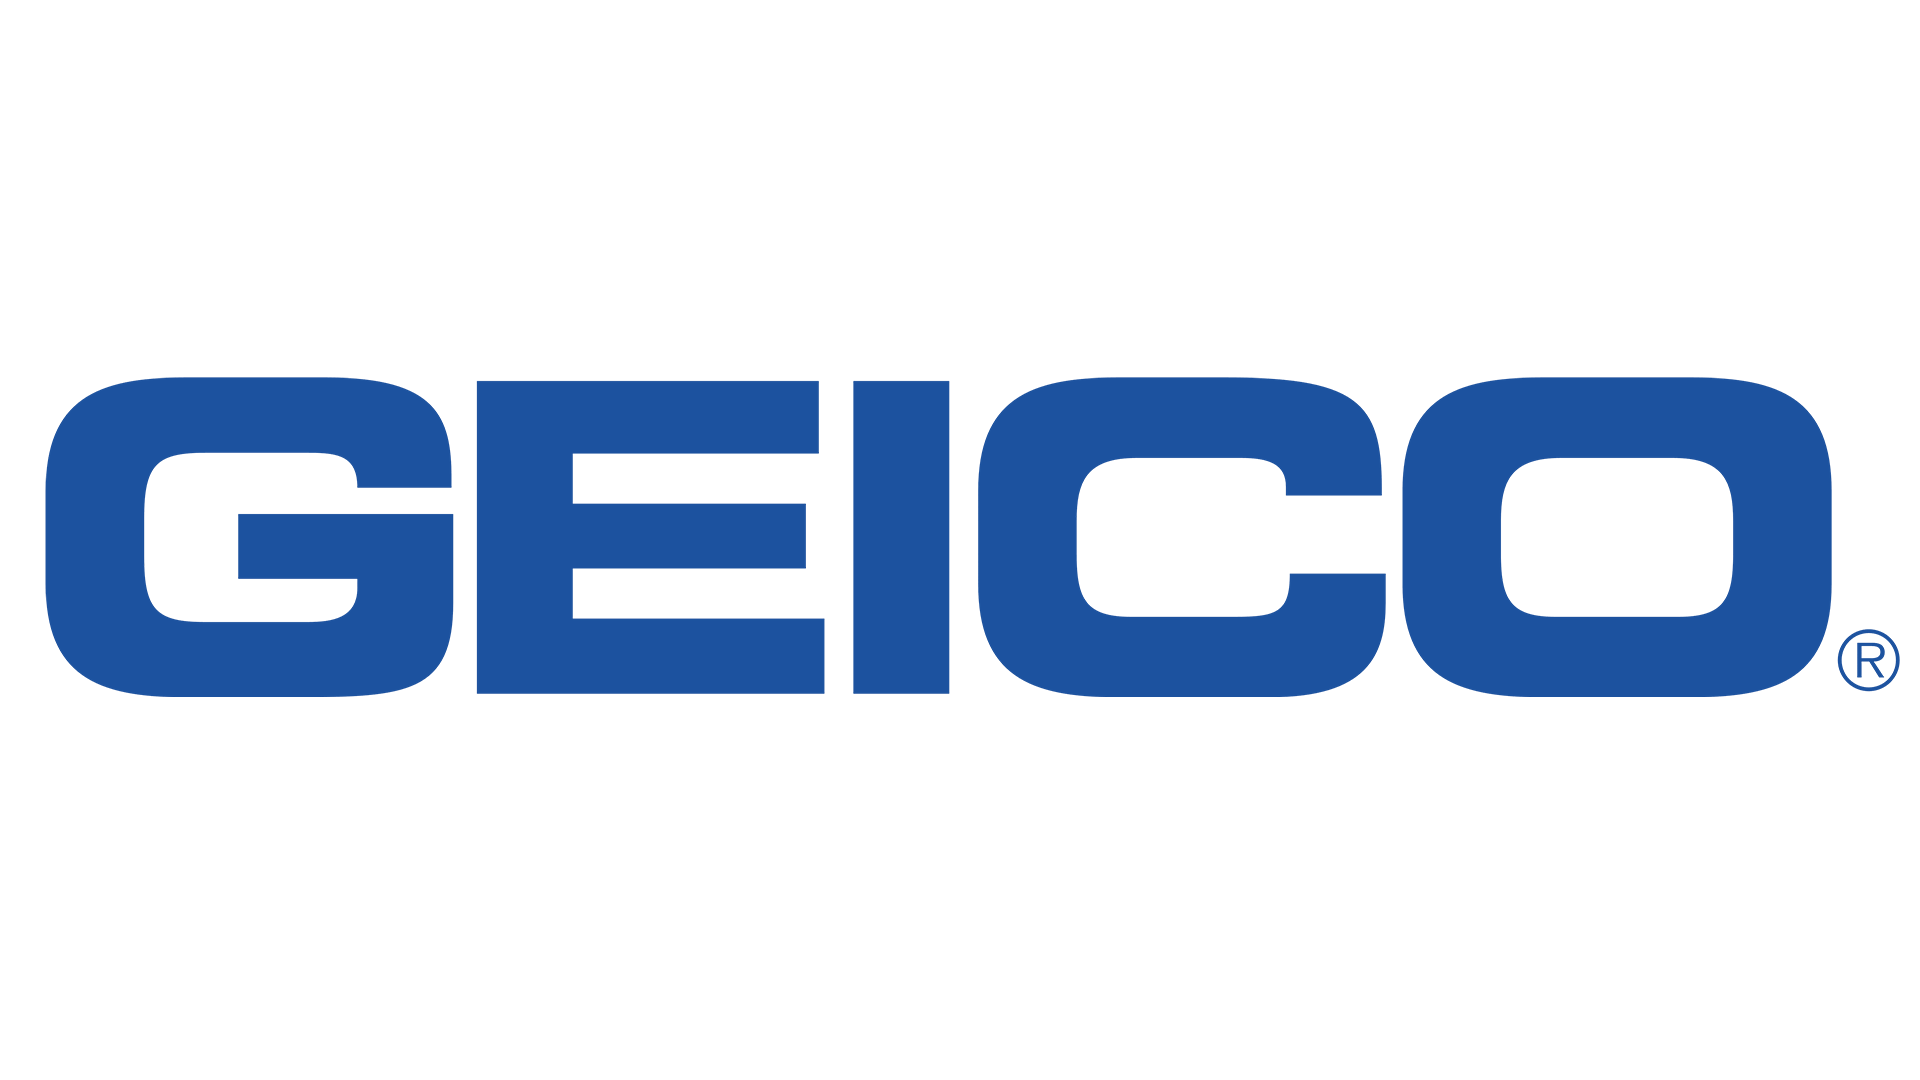 Choose windshield replacement service that accepts Geico claims